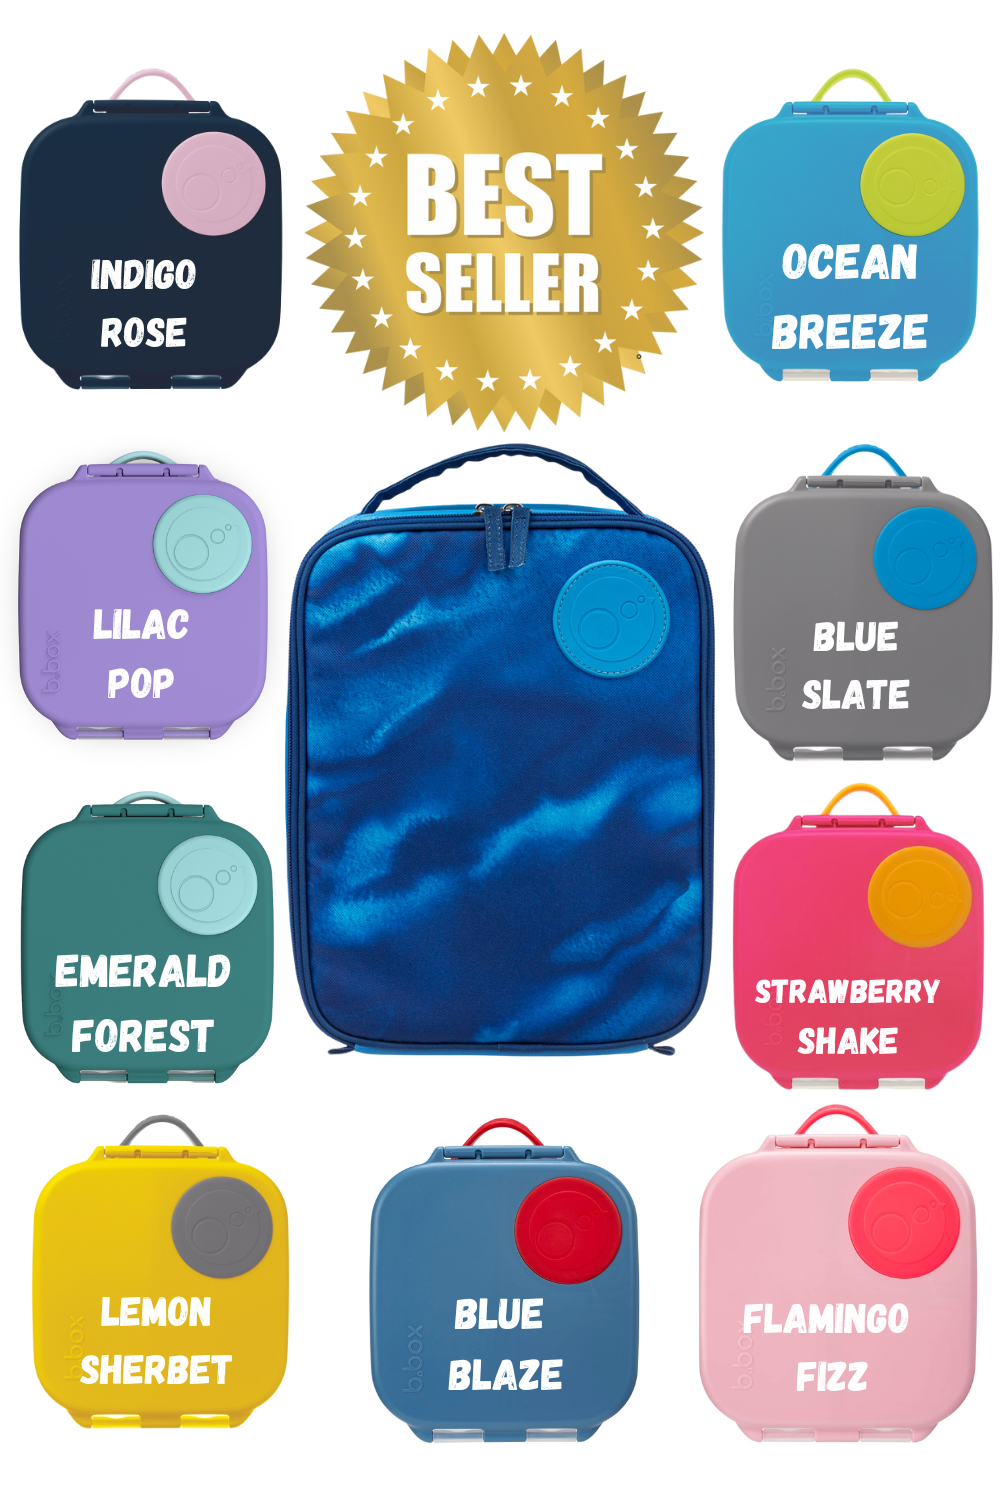 flexi insulated lunch bag - Morning Sky Pink and Blue – b.box – b.box for  kids